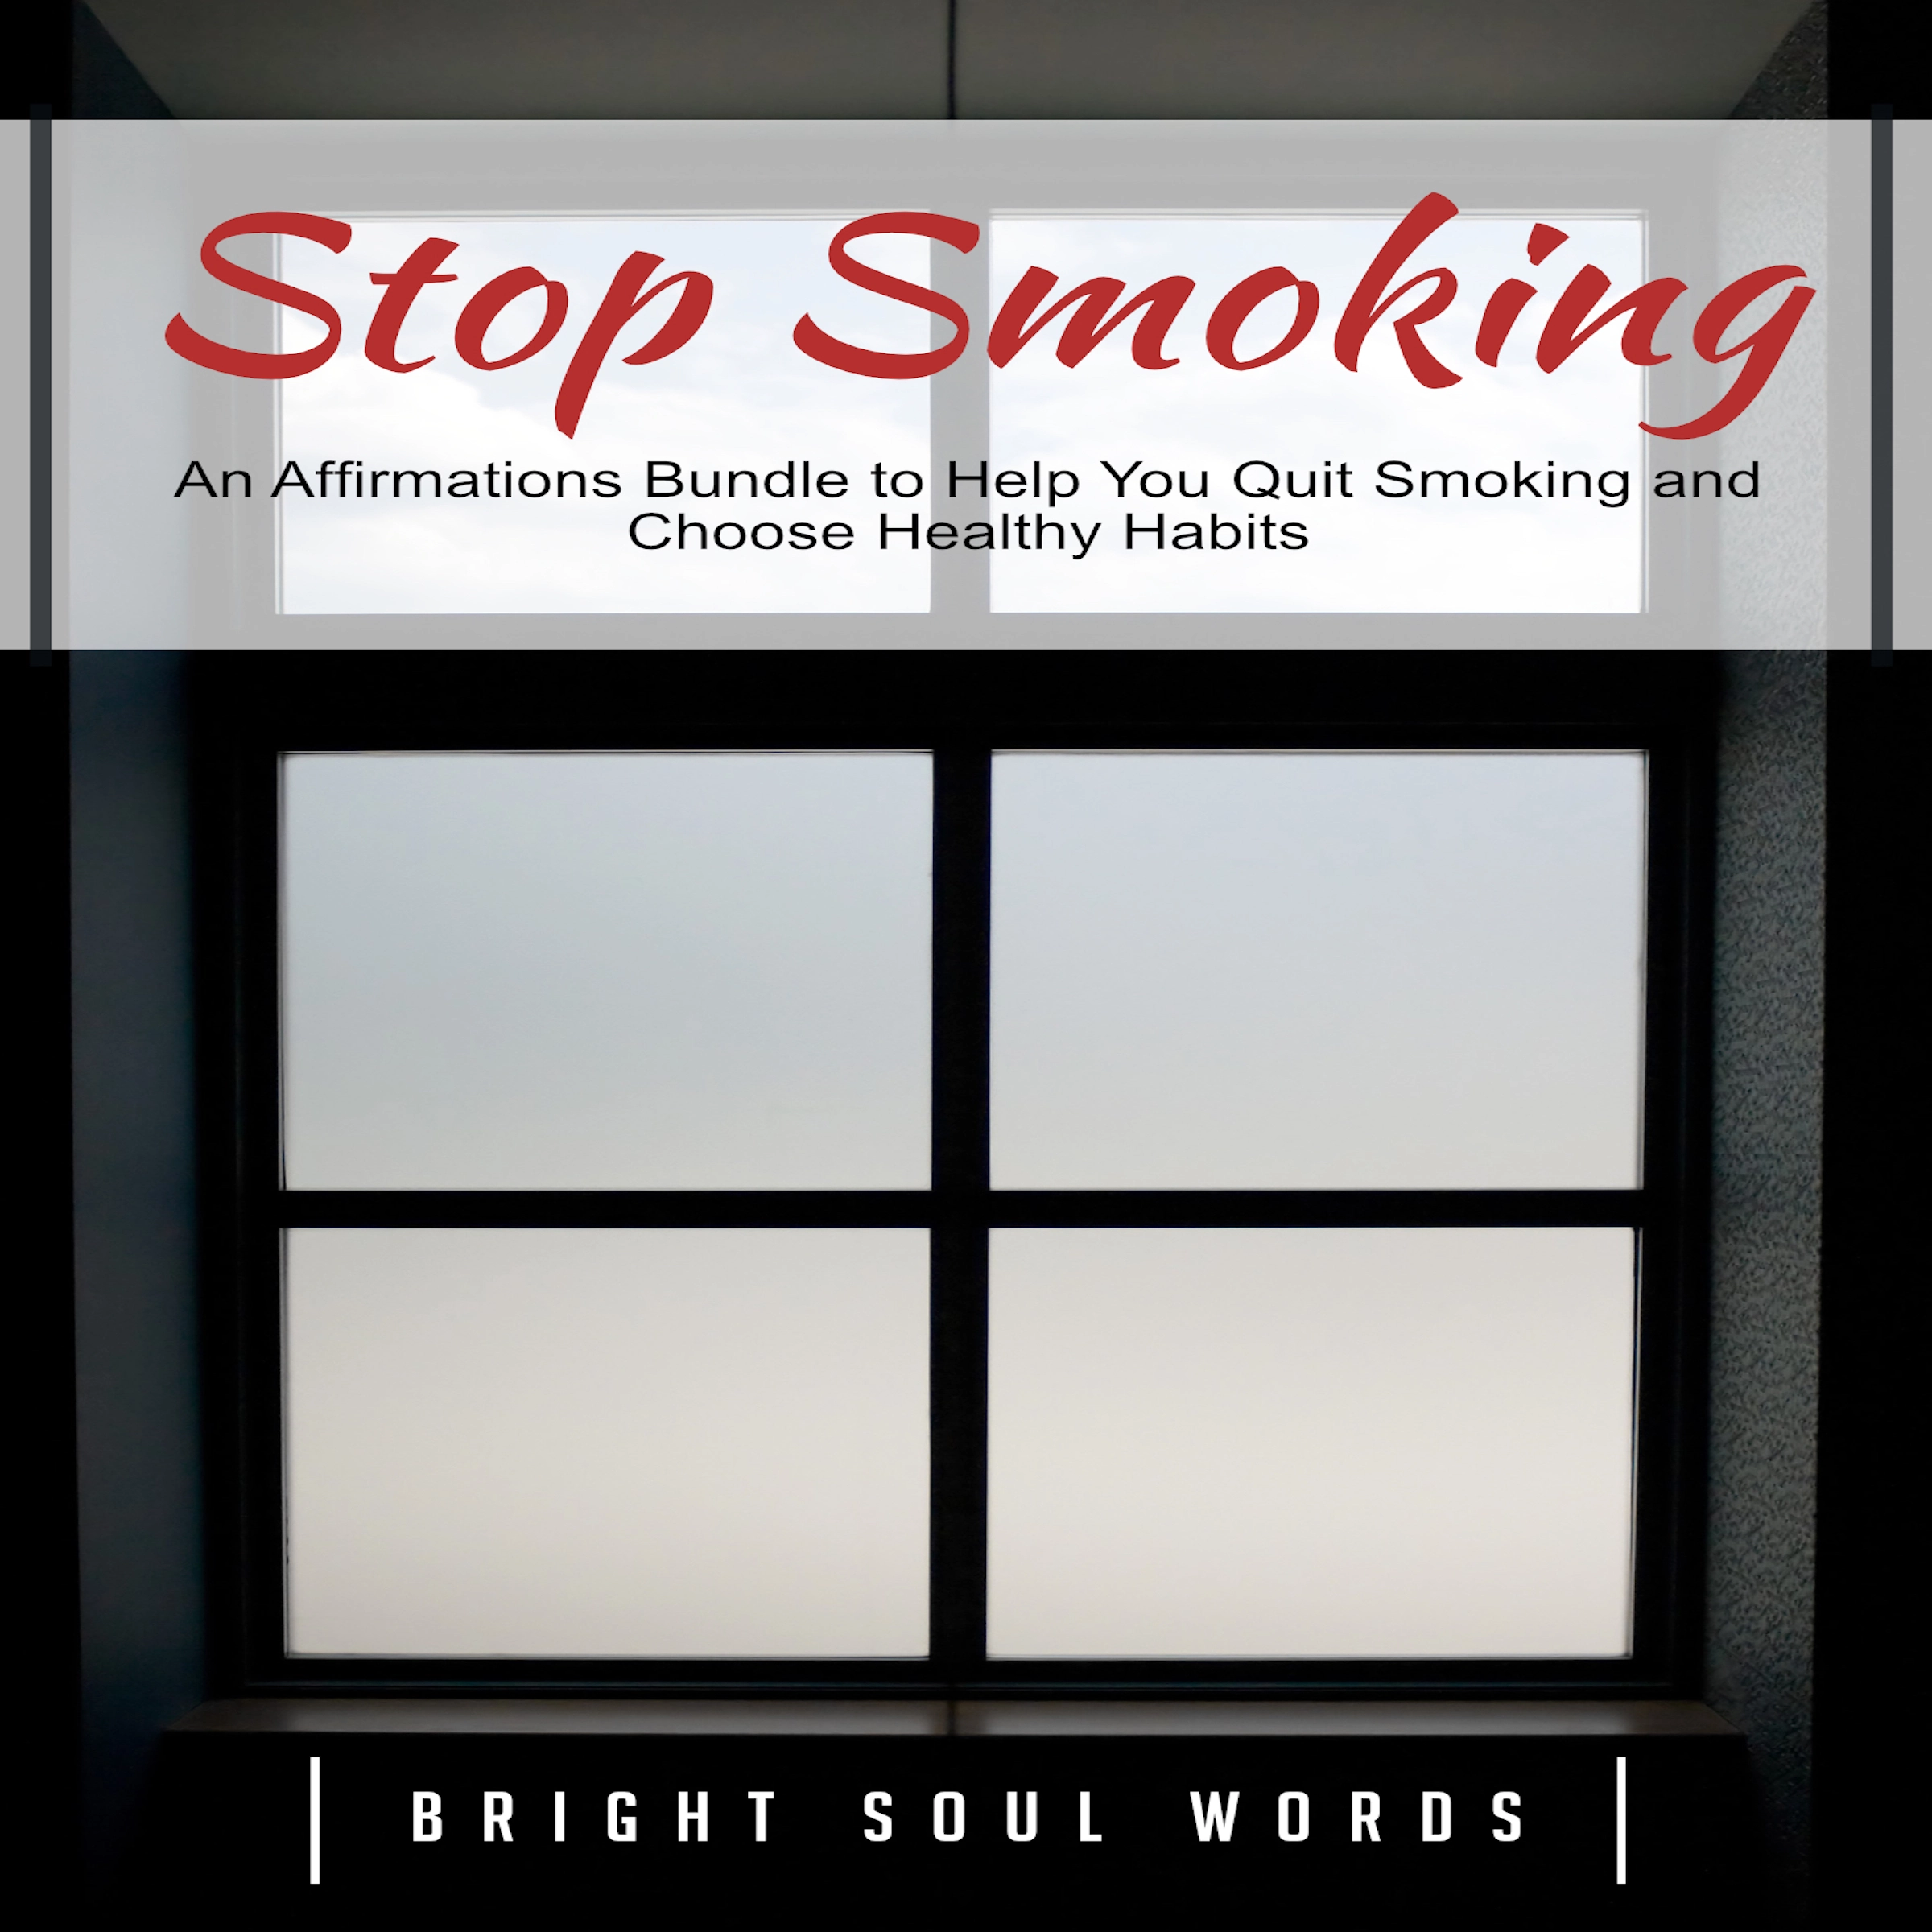 Stop Smoking: An Affirmations Bundle to Help You Quit Smoking and Choose Healthy Habits Audiobook by Bright Soul Words